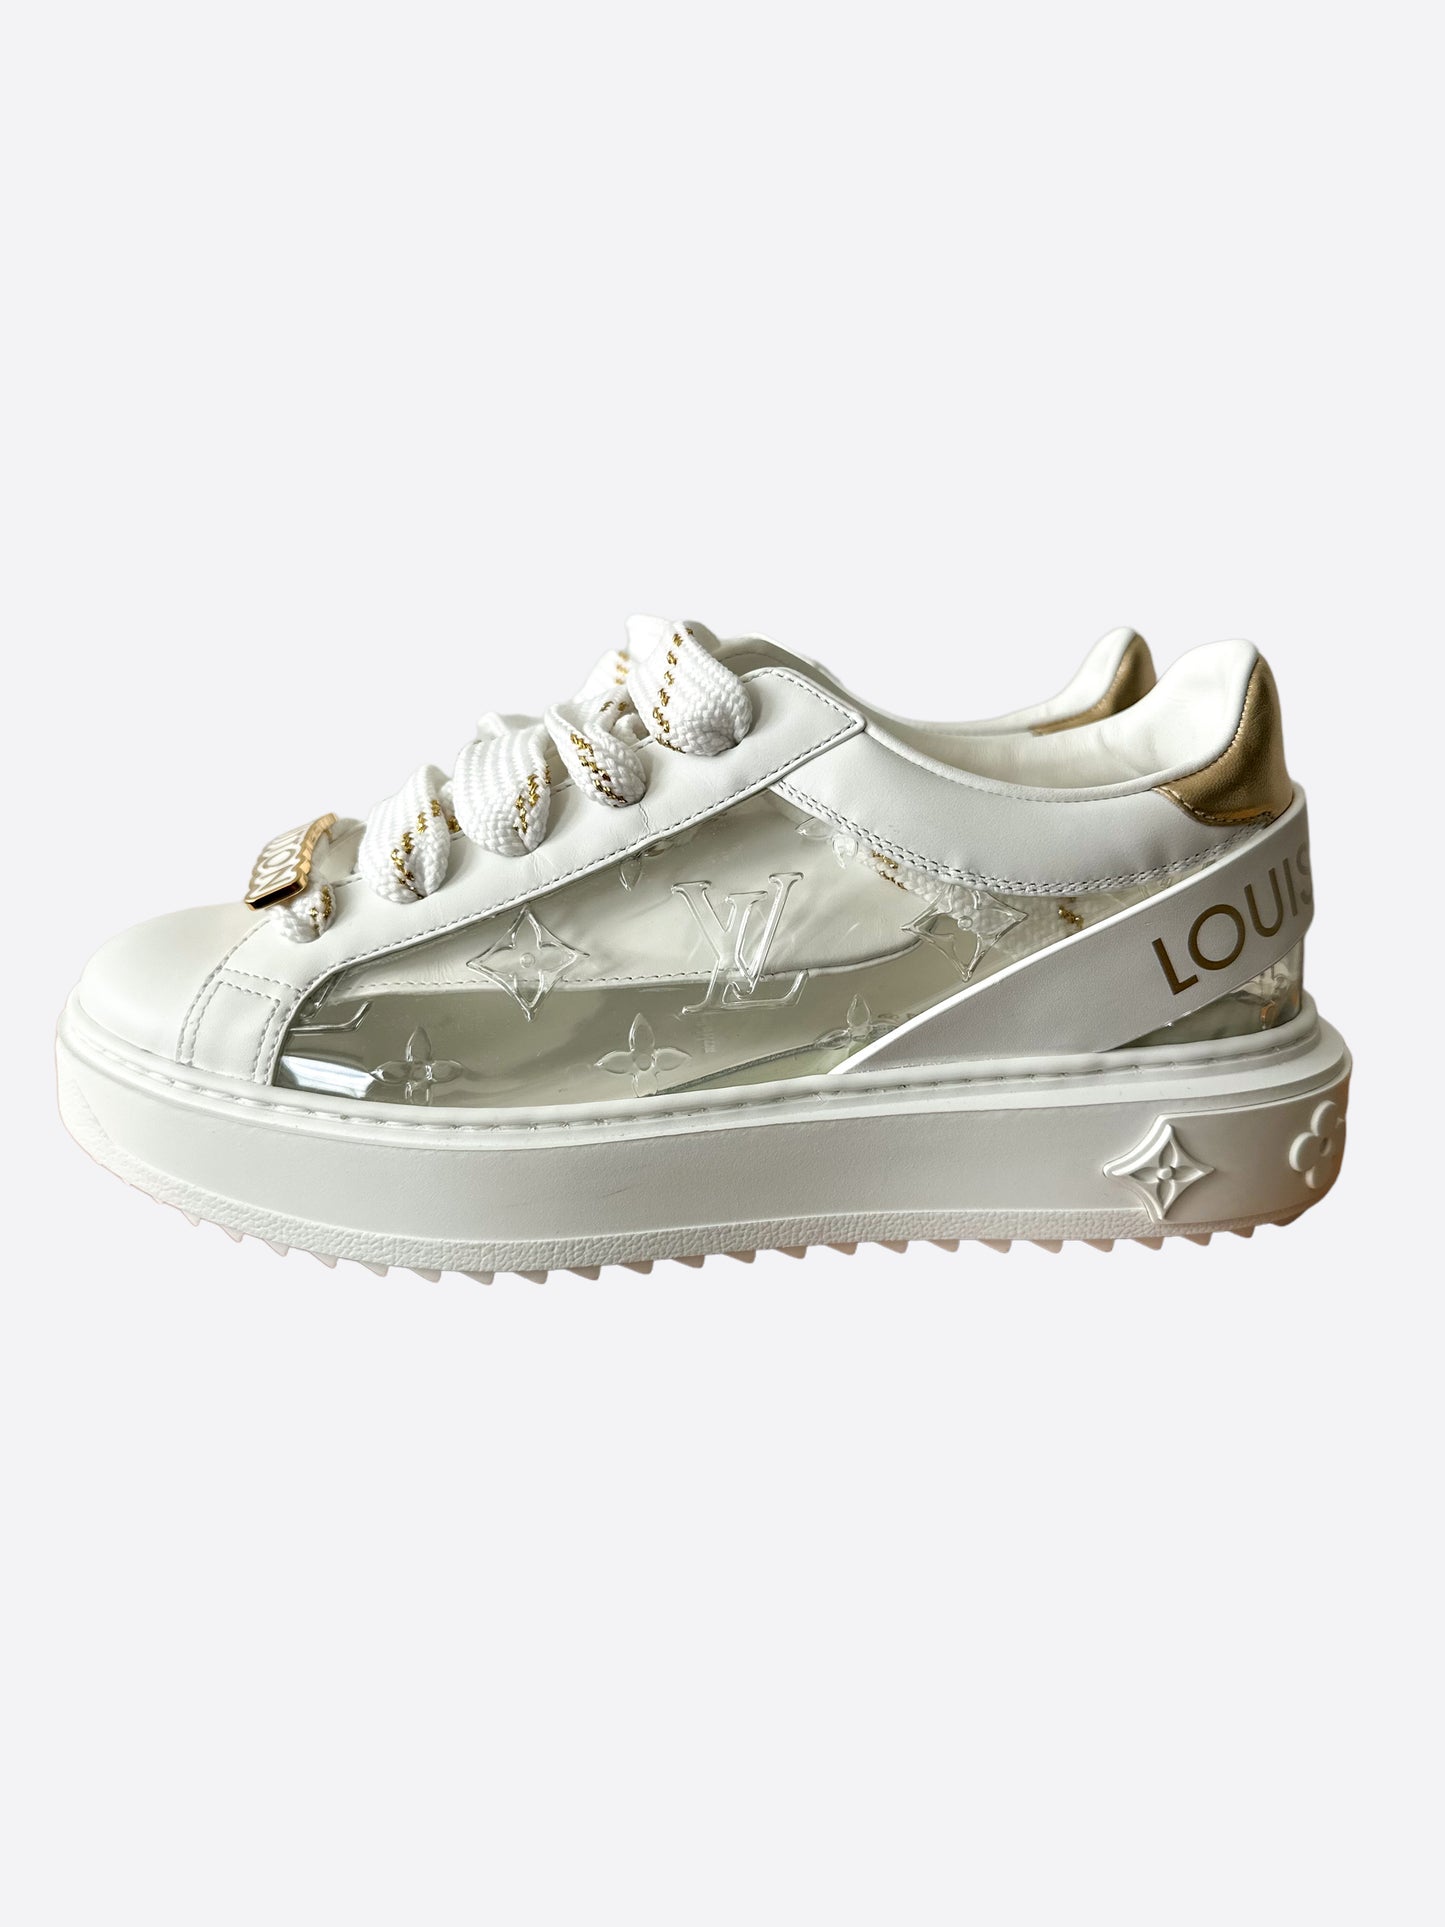 Louis Vuitton Time Out Debossed Monogram Transparent Upper White Gold  (Women's) (White Pink Socks Included) - 1A9PZS - US